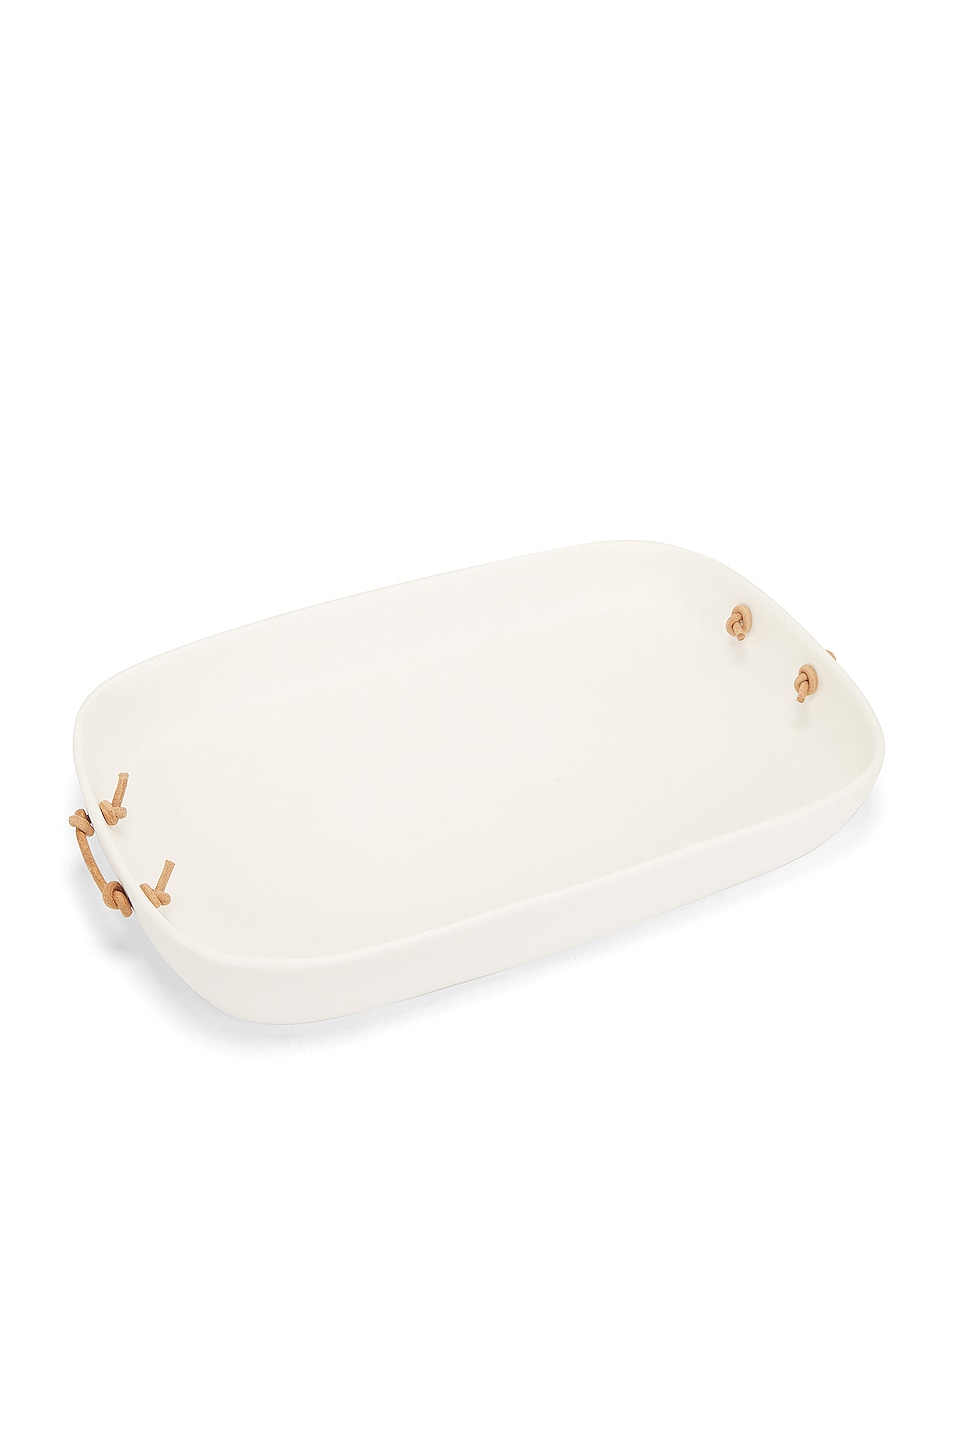 Image 1 of Tina Frey Designs Extra Large Tray with Leather Handles in White